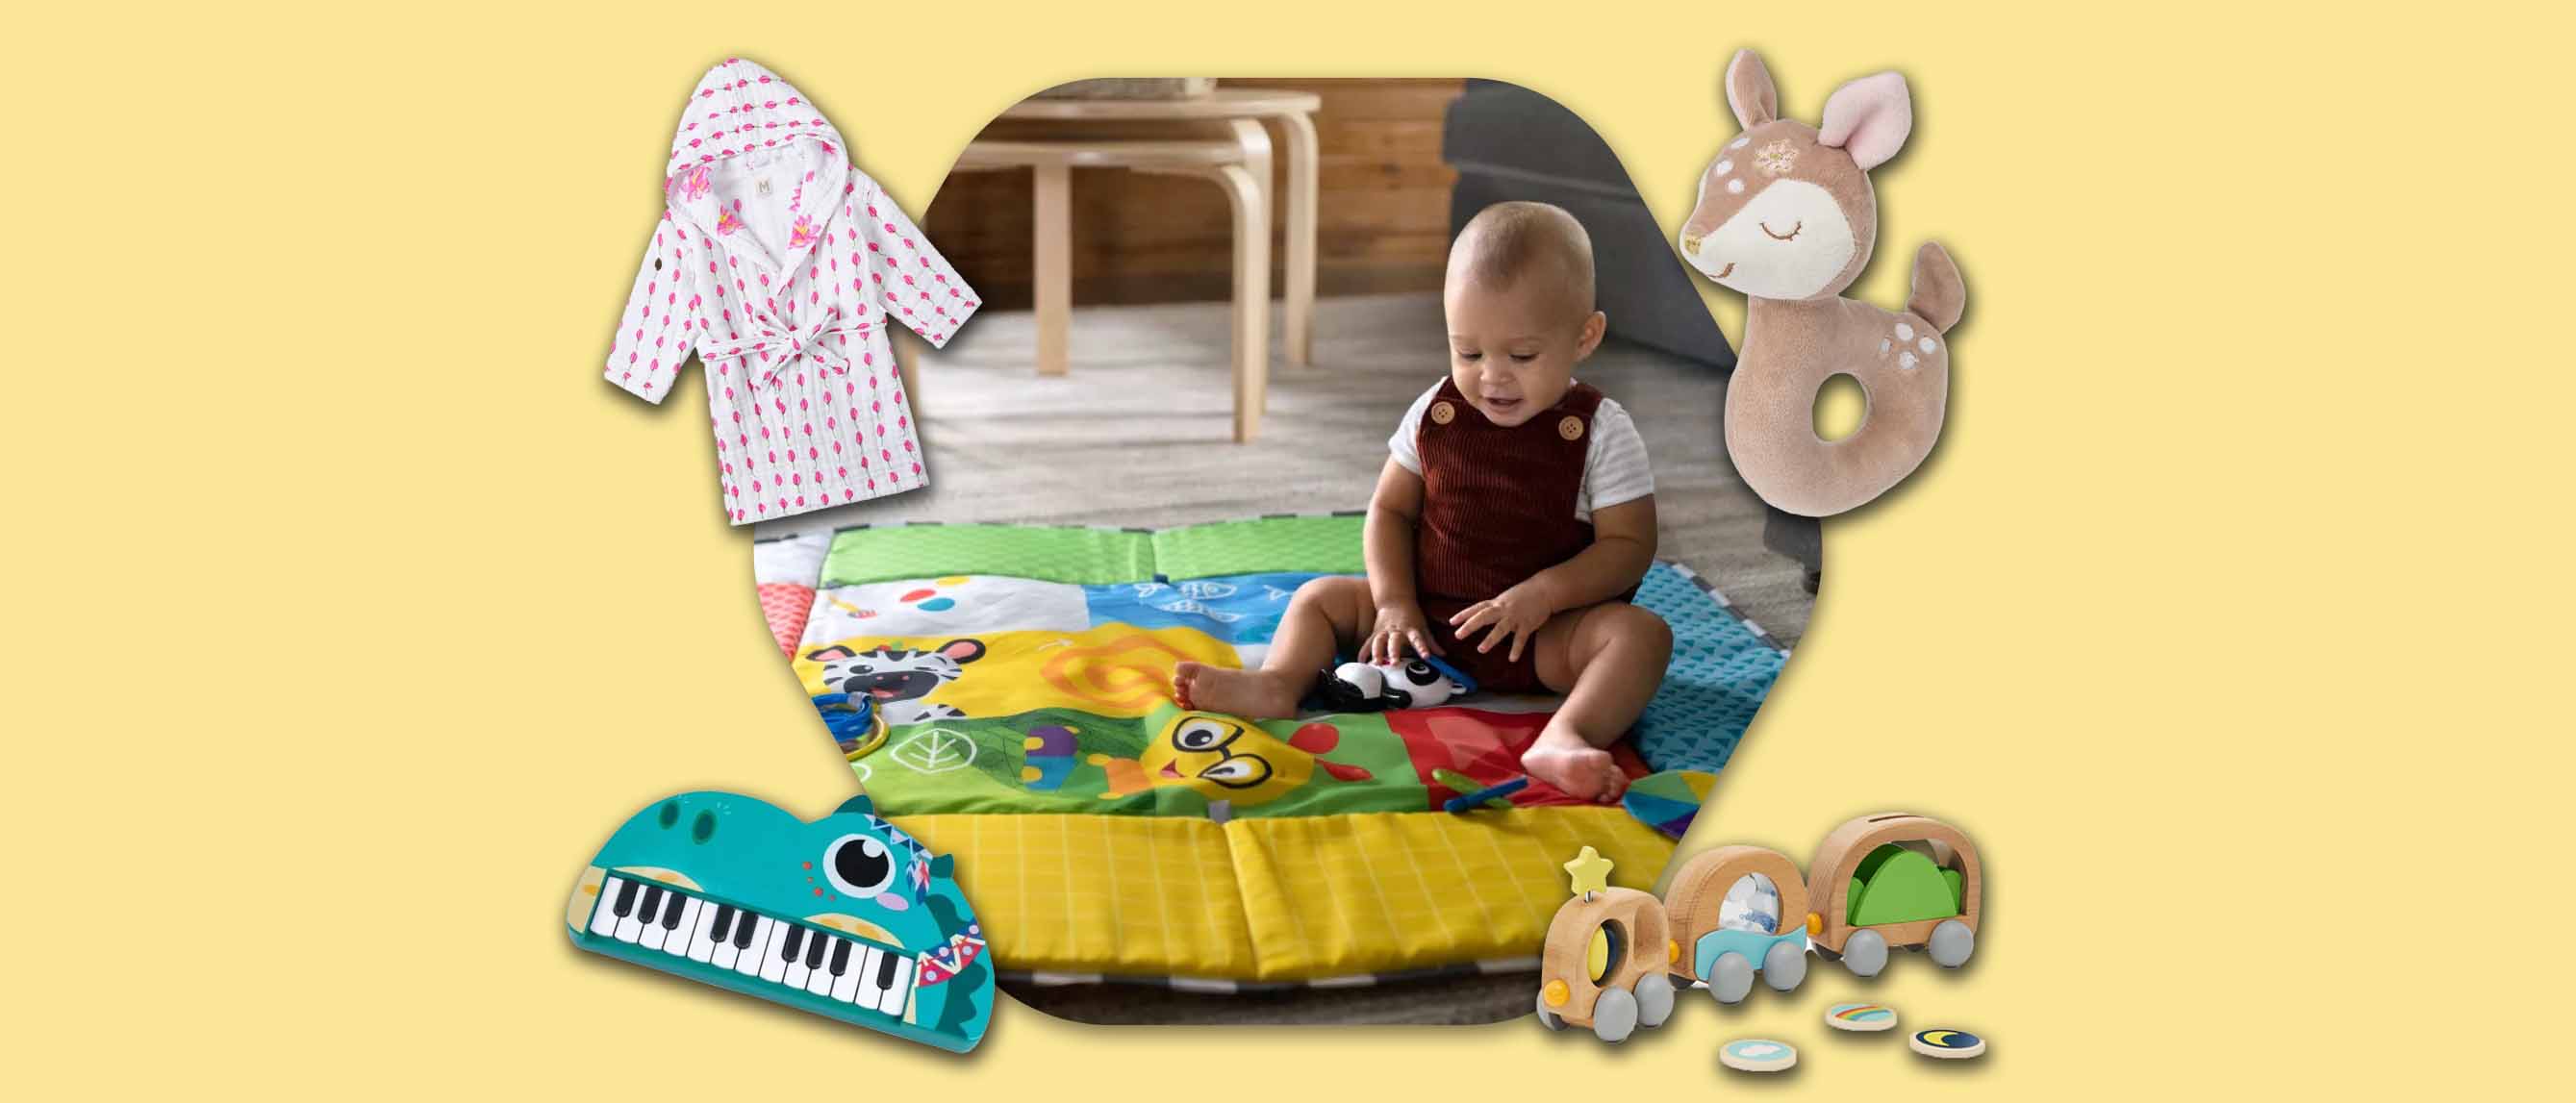 Baby playing on playmat and other toys